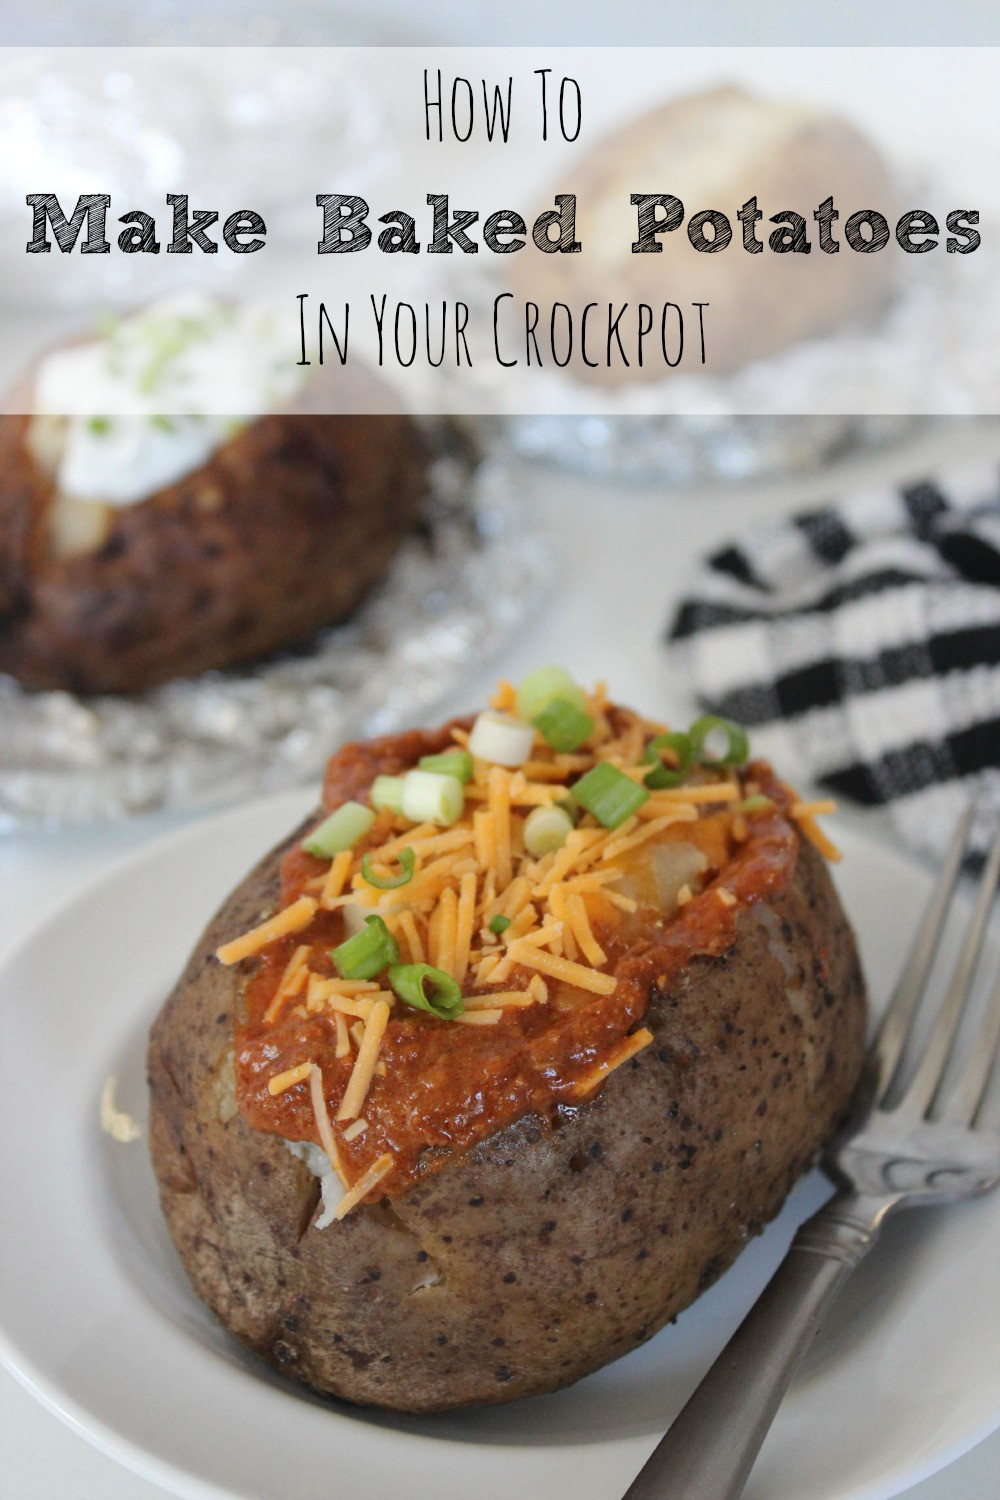 How To Cook A Baked Potato
 How To Bake Potatoes in the Crockpot Moms Need To Know